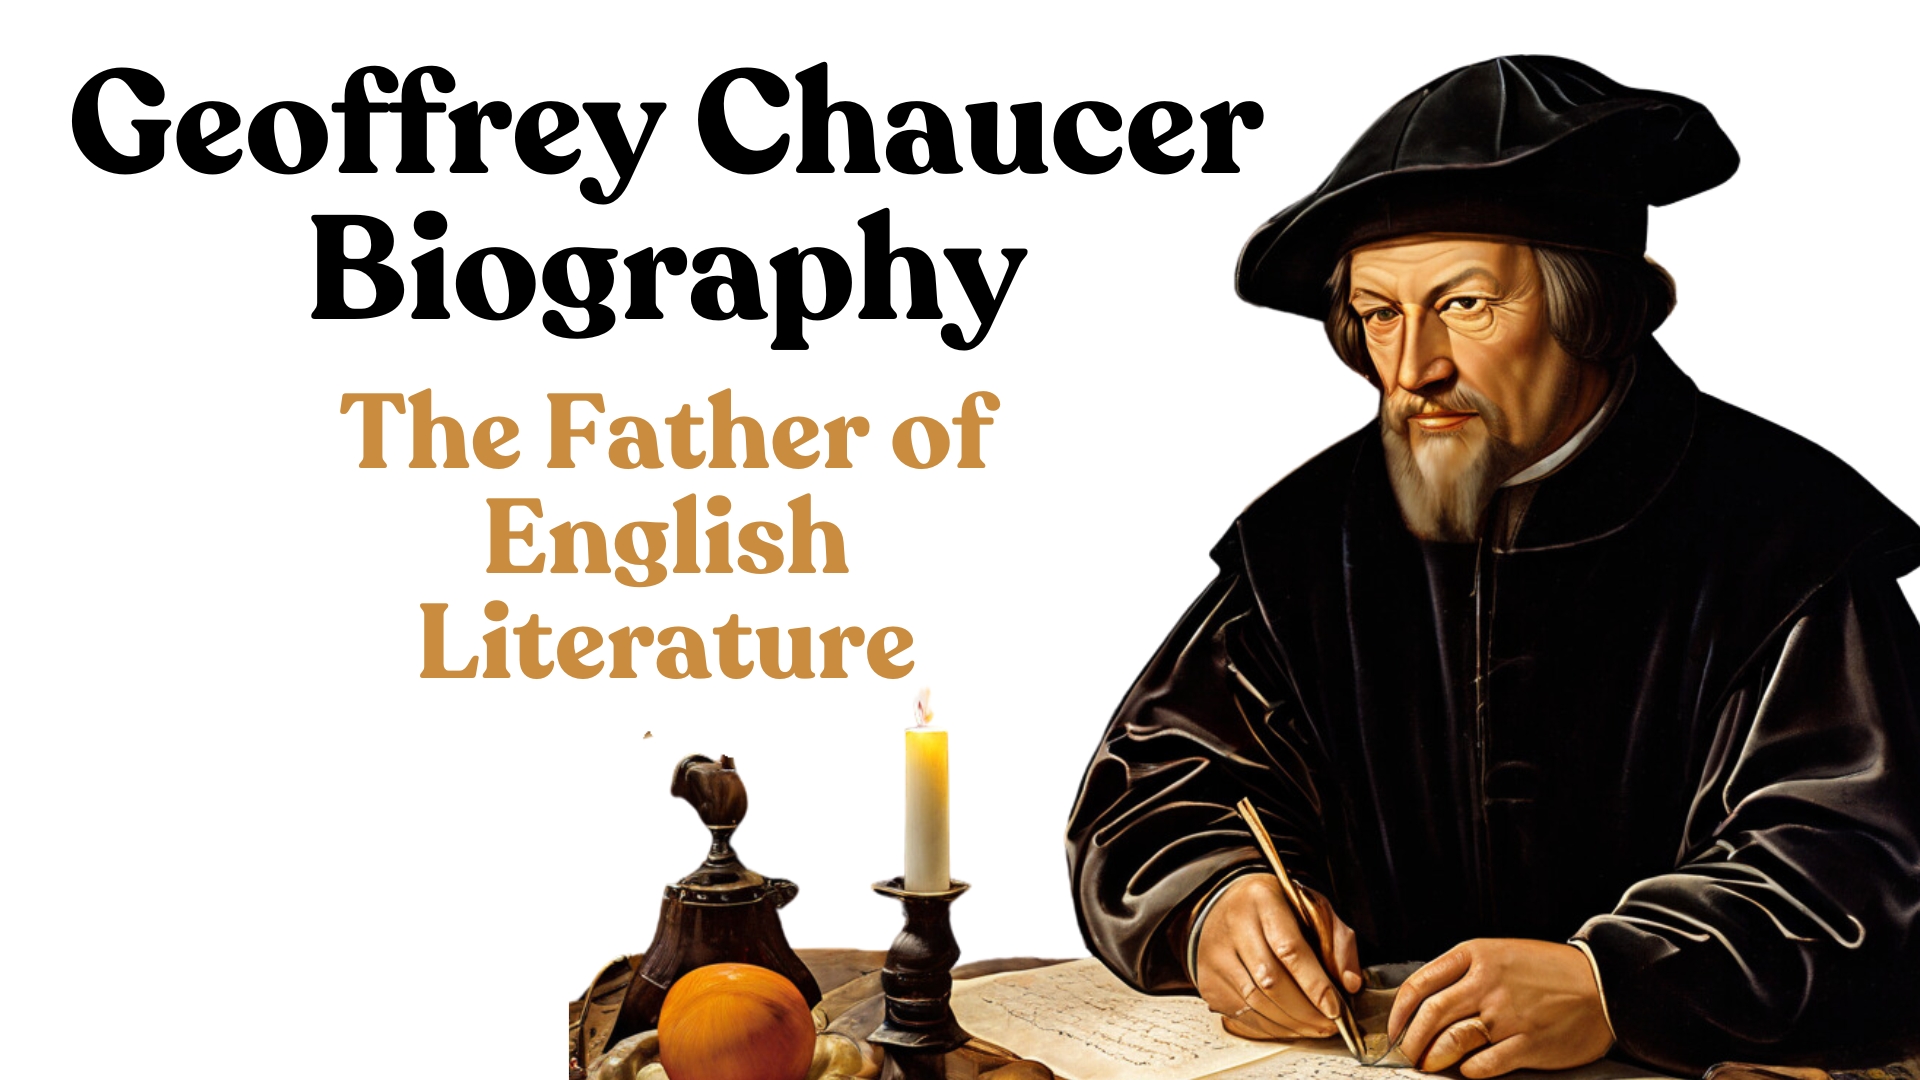 Geoffrey Chaucer Biography - The Father of English Literature